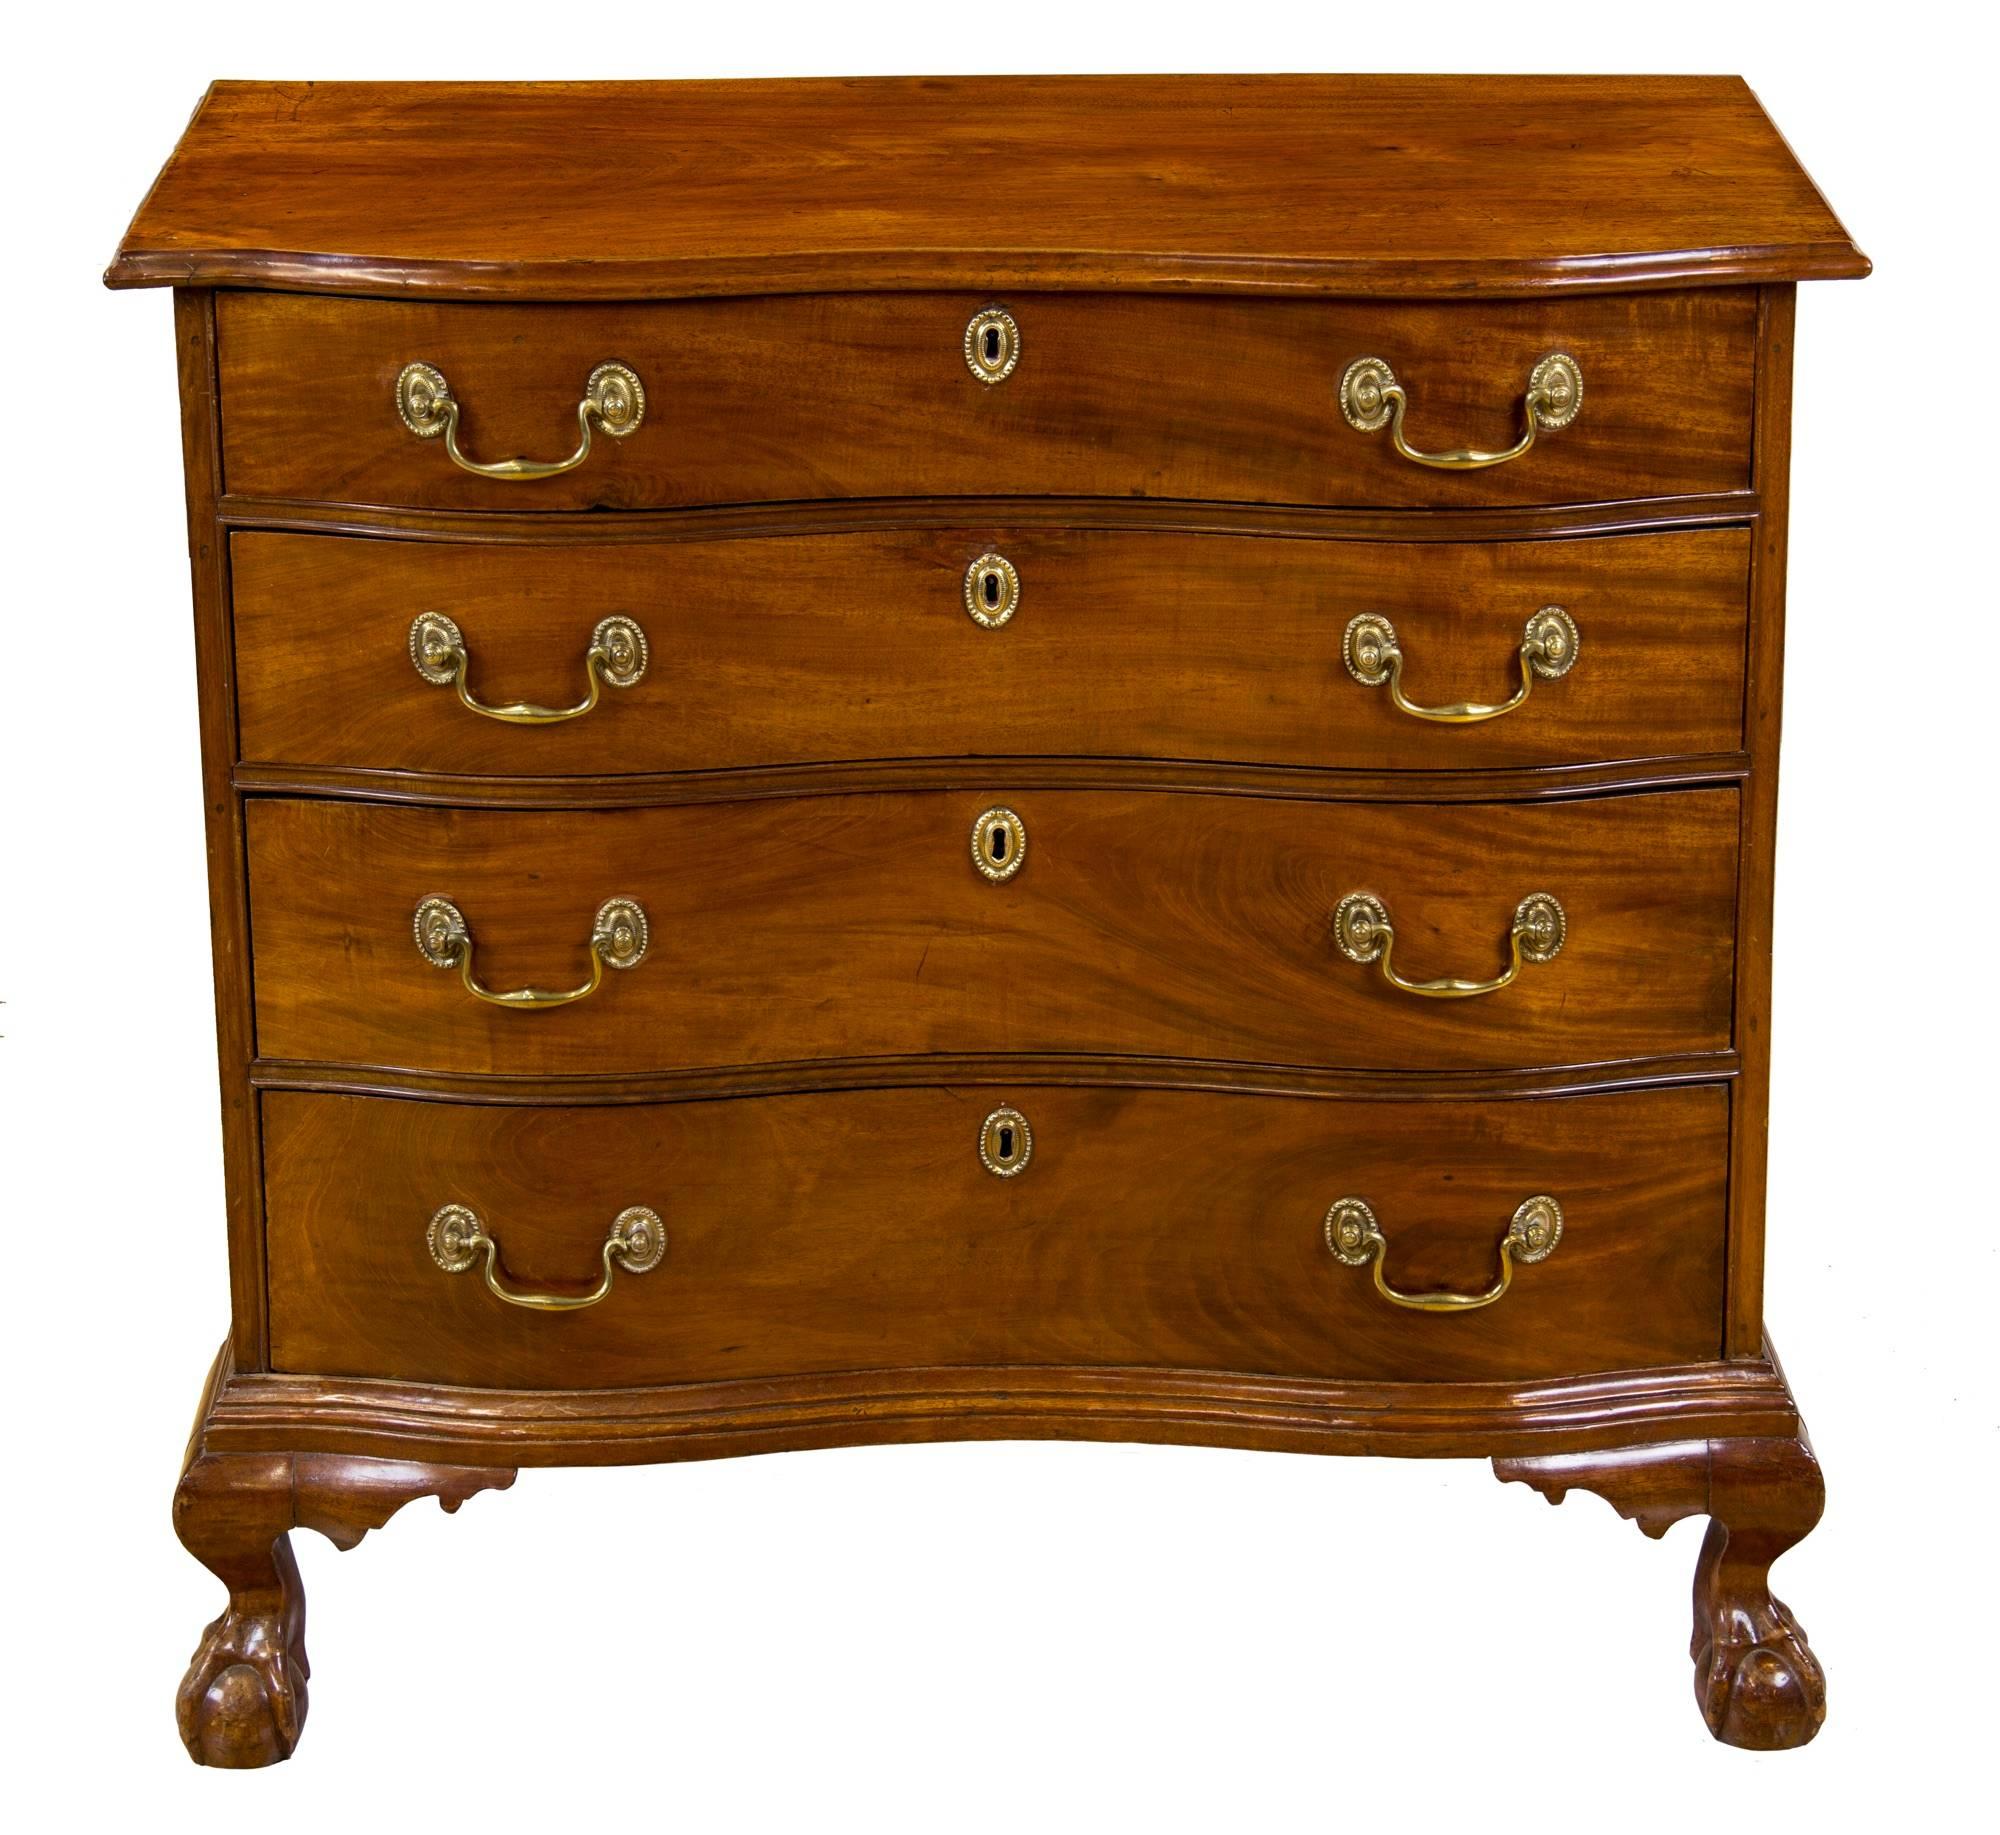 This chest is compact, 34 inches wide with a close conforming top and is elevated by four claw and ball feet, which are typical in style to those coming out of Boston at that time (see the scan for an oxbow desk from Newburyport, in New England